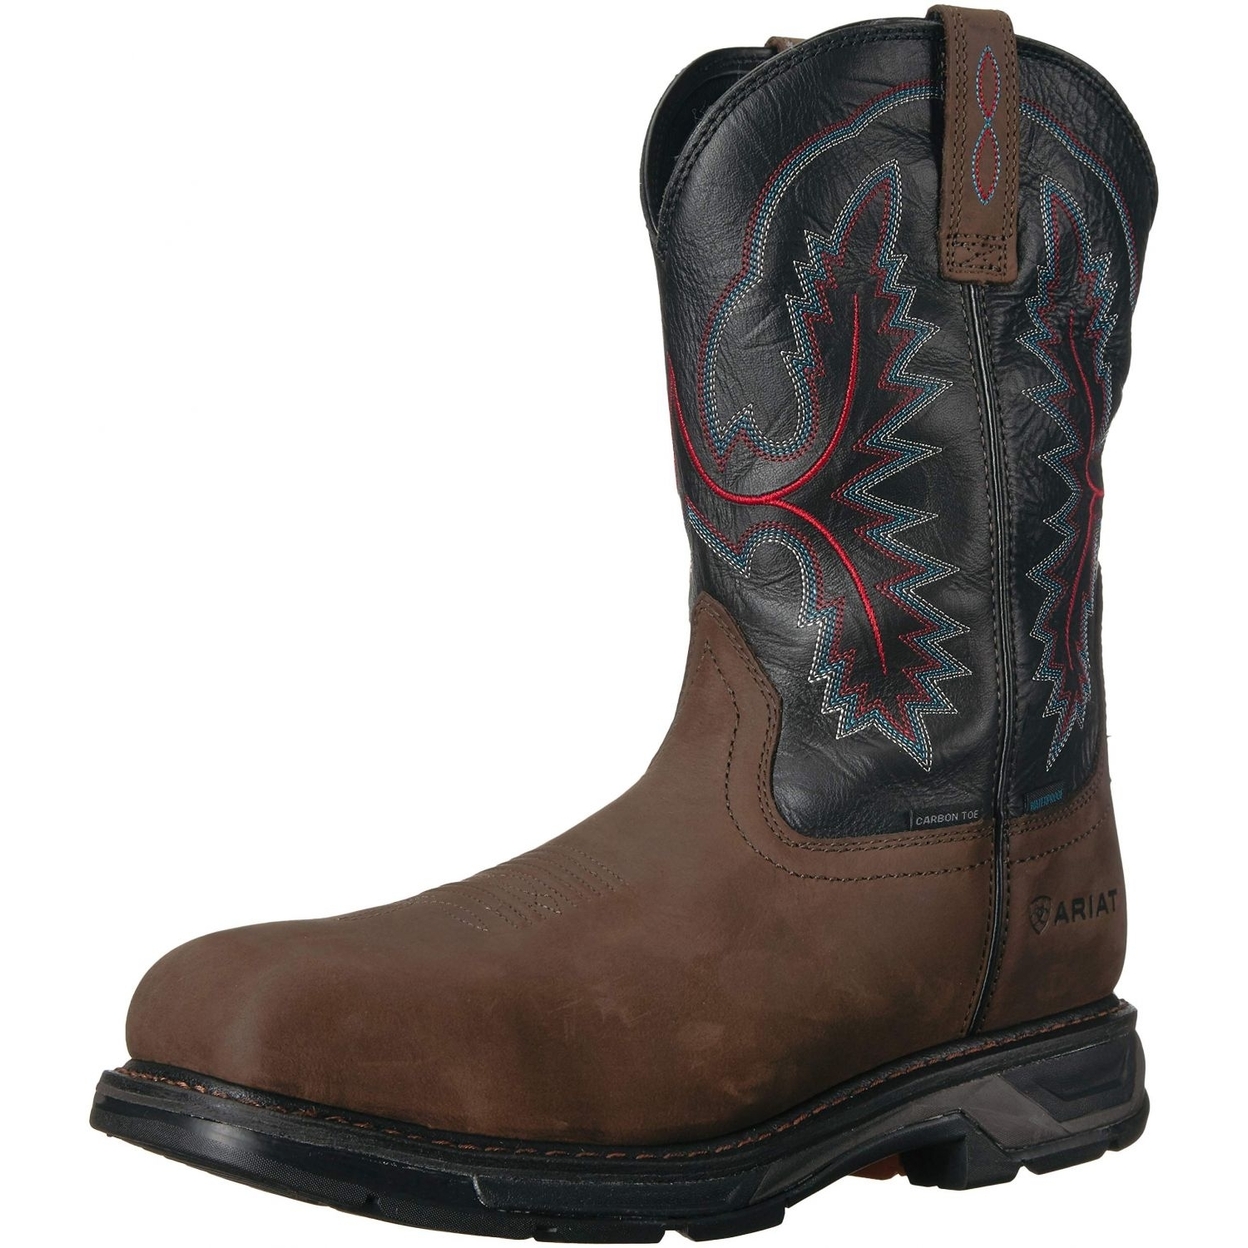 Ariat Work Men's Workhog XT H2O Carbon Toe Western Boot ONE SIZE BRK/ FOREST - BRK/ FOREST, 13-2E